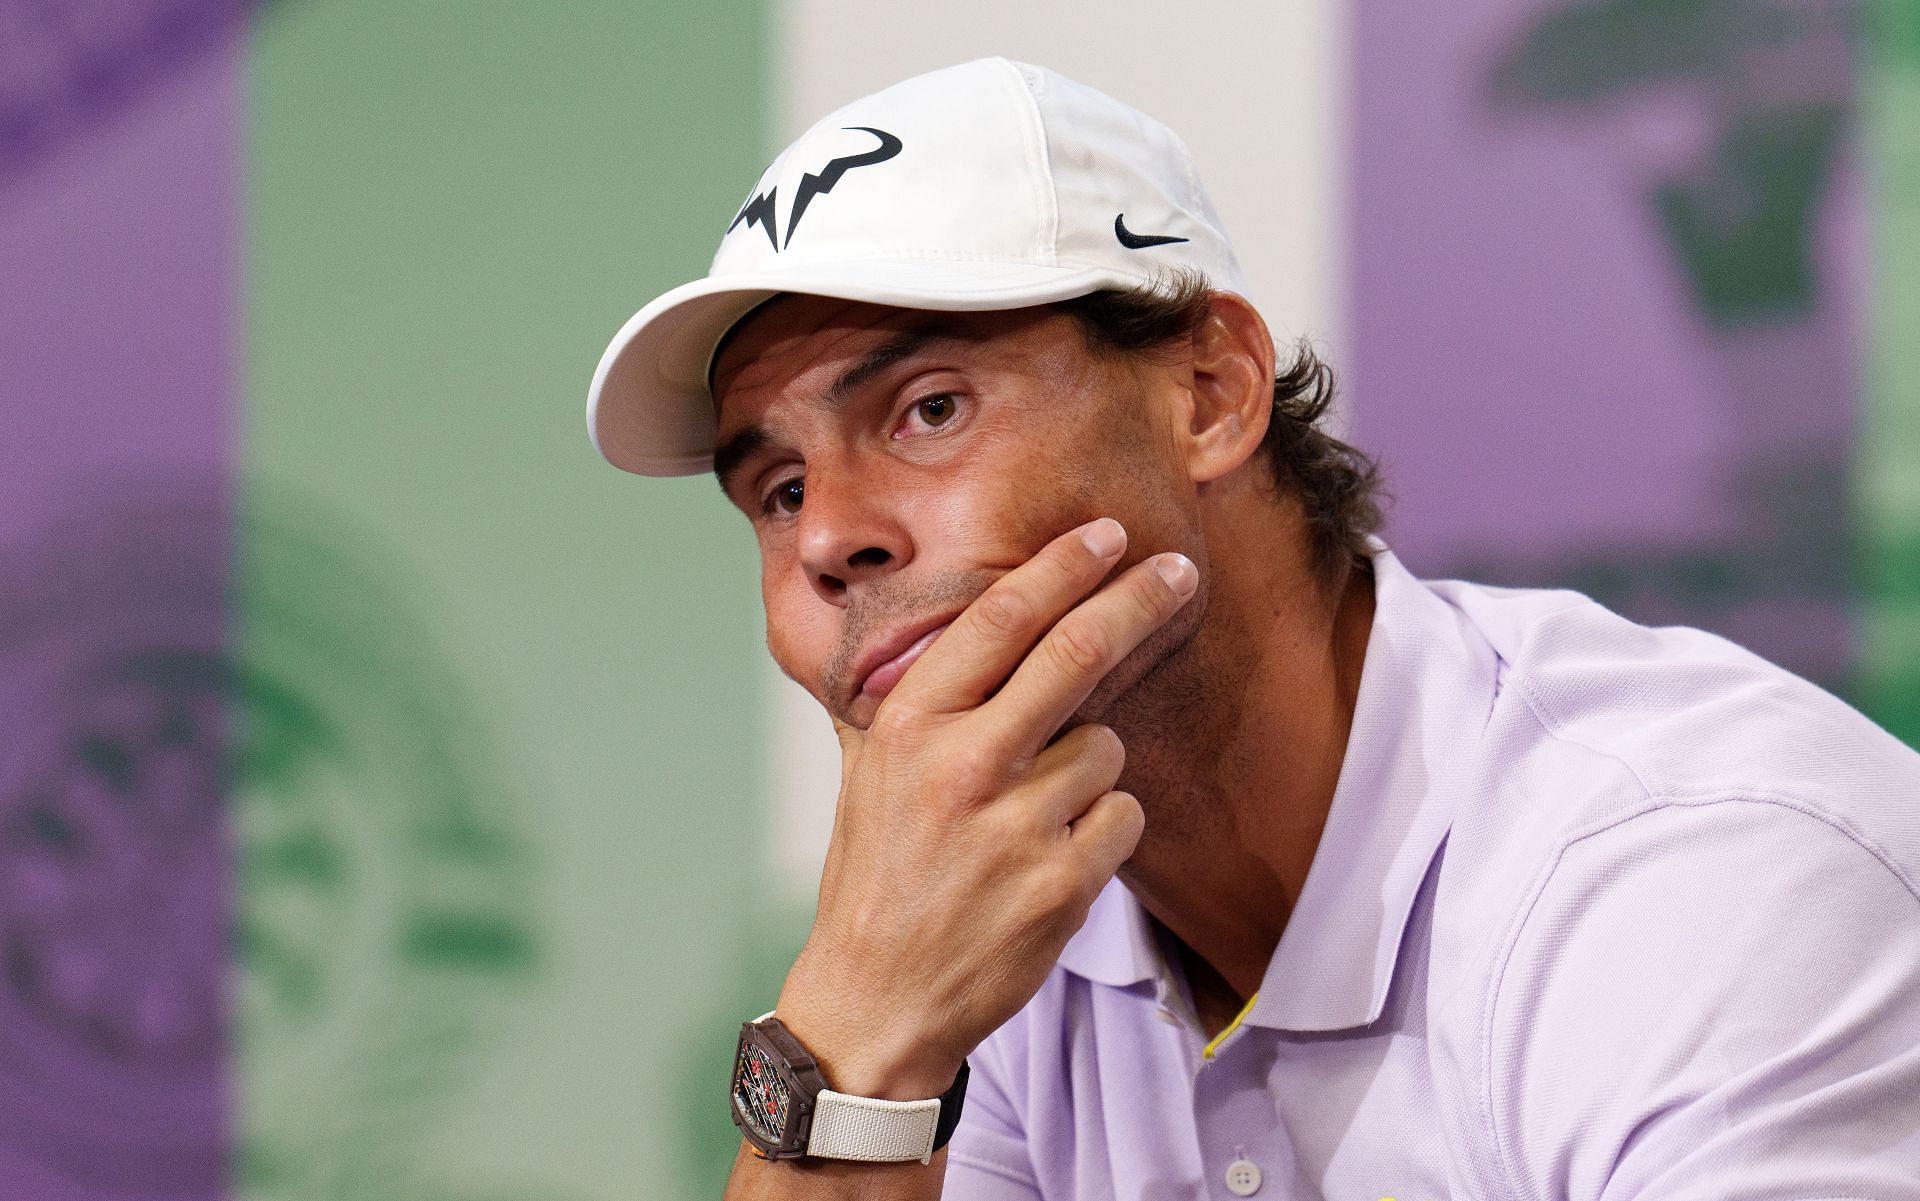 Rafael Nadal has slipped out of the top 10 after 912 consecutive weeks